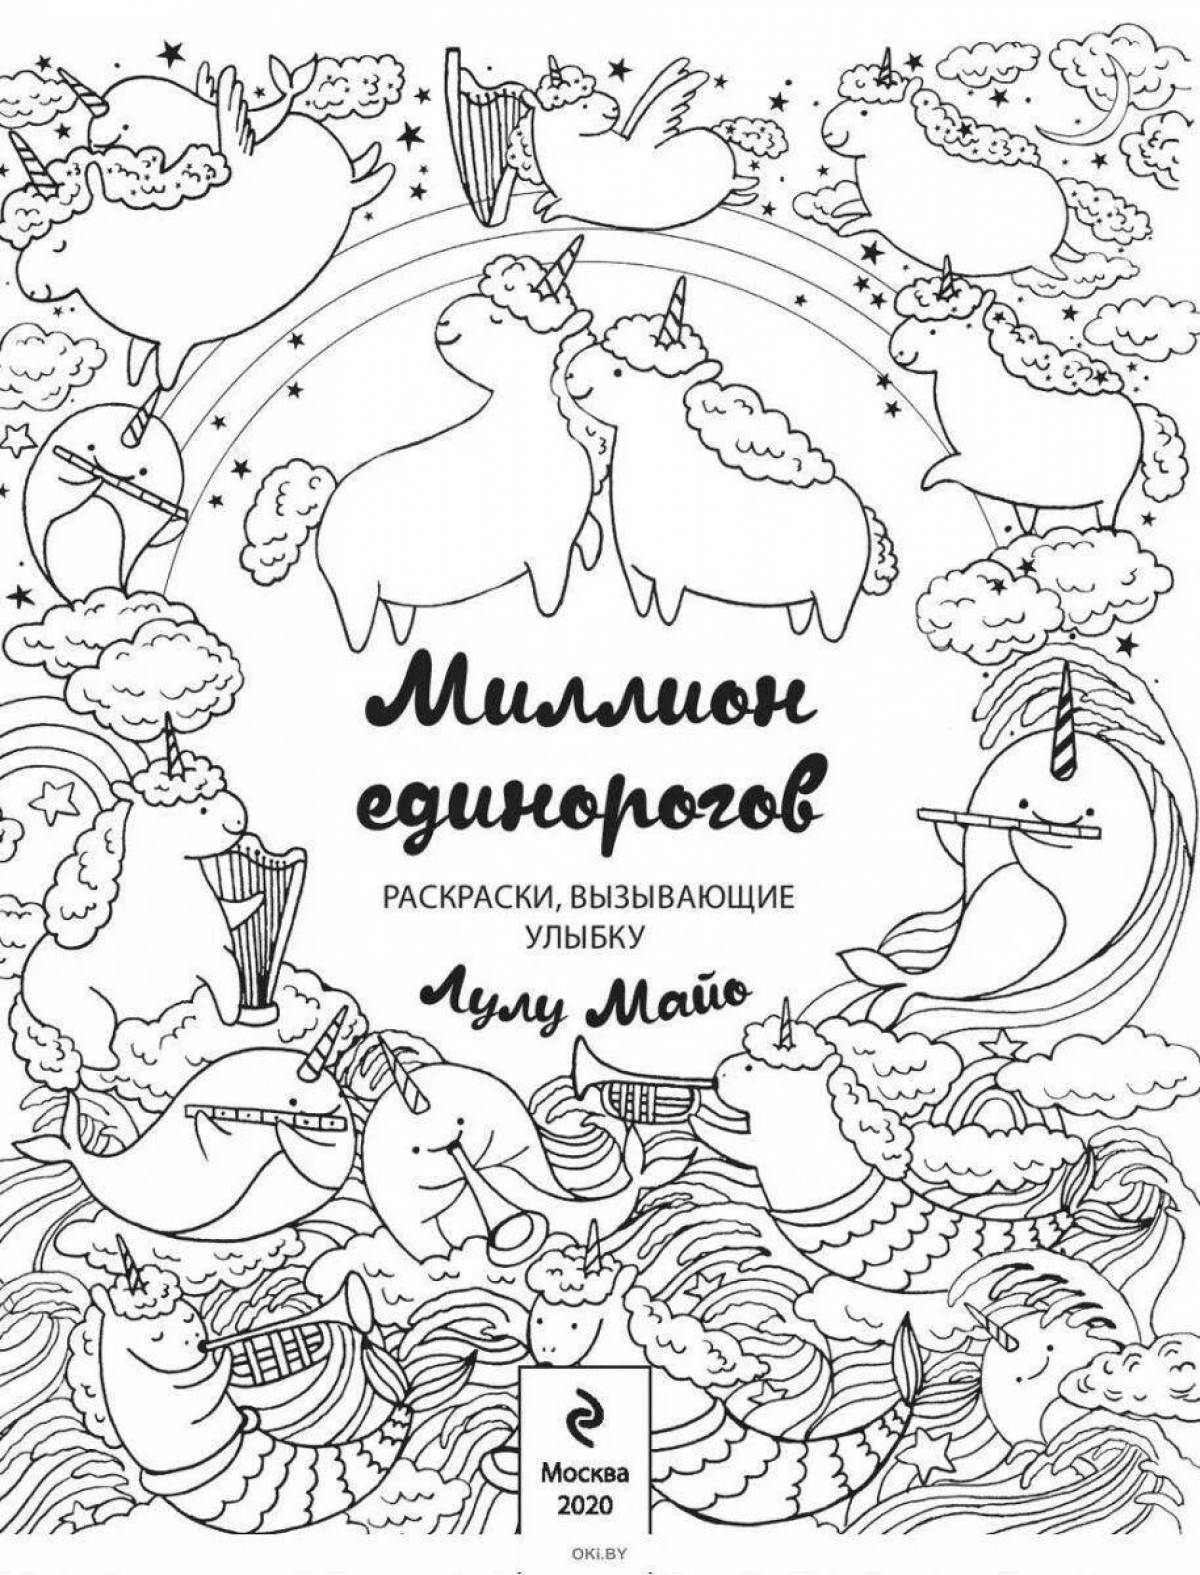 Coloring book busy with a million bears